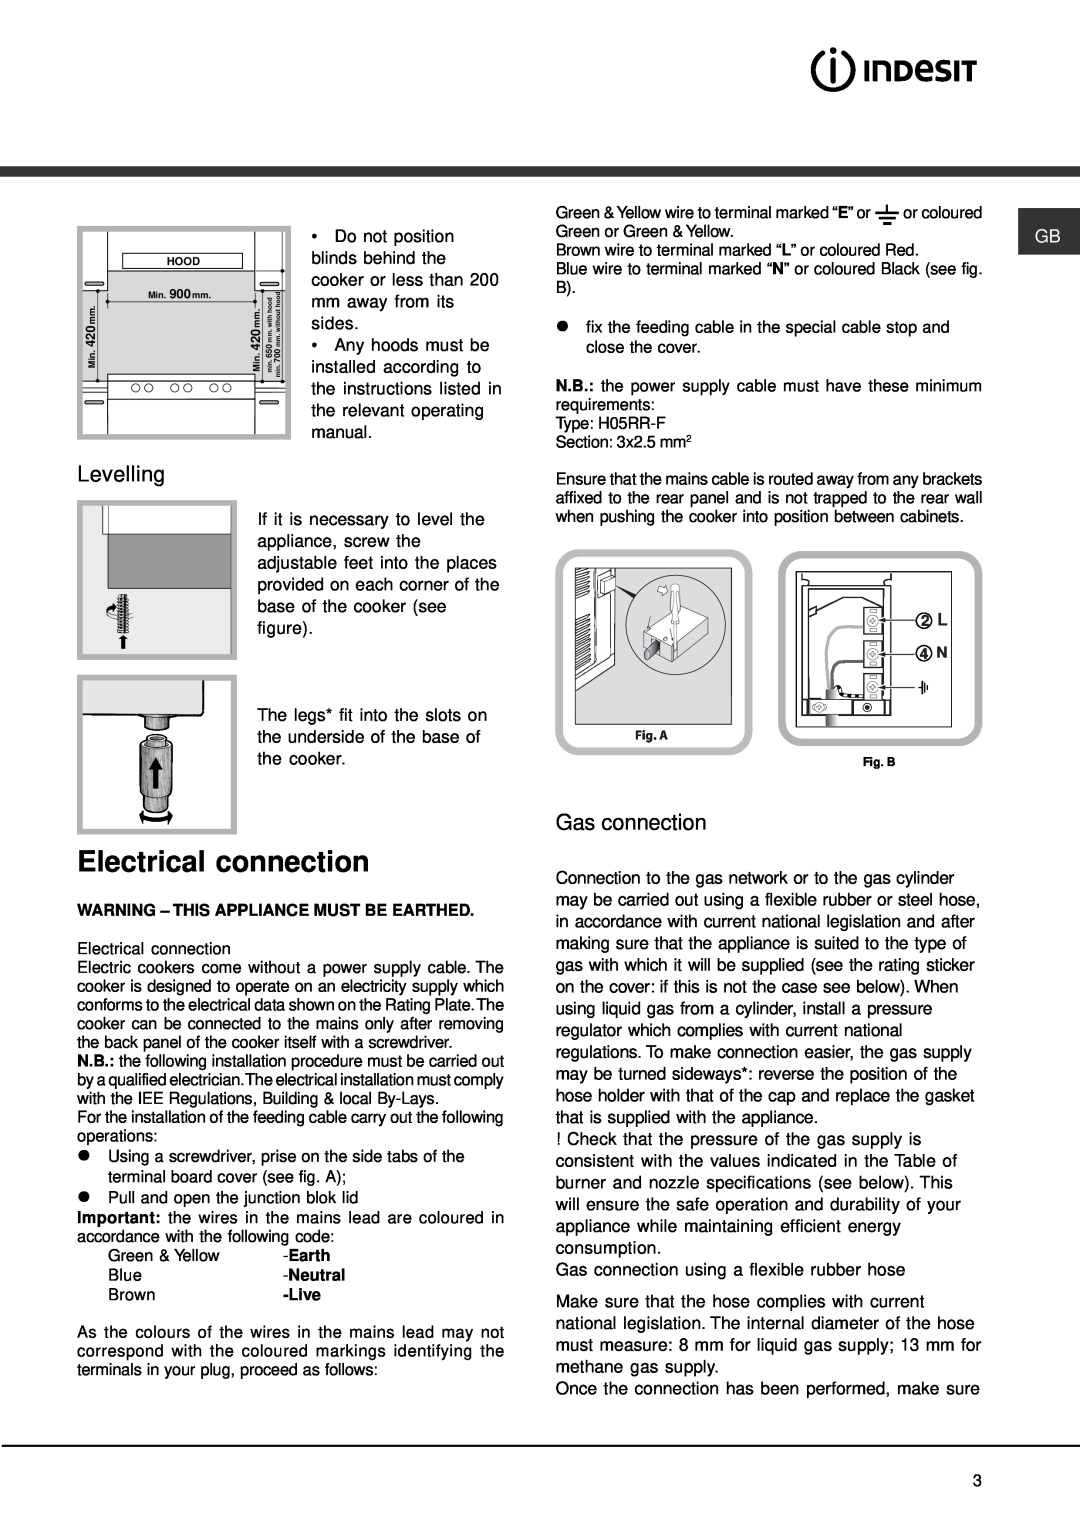 Indesit KP900GX specifications Levelling, Gas connection, Electrical connection 